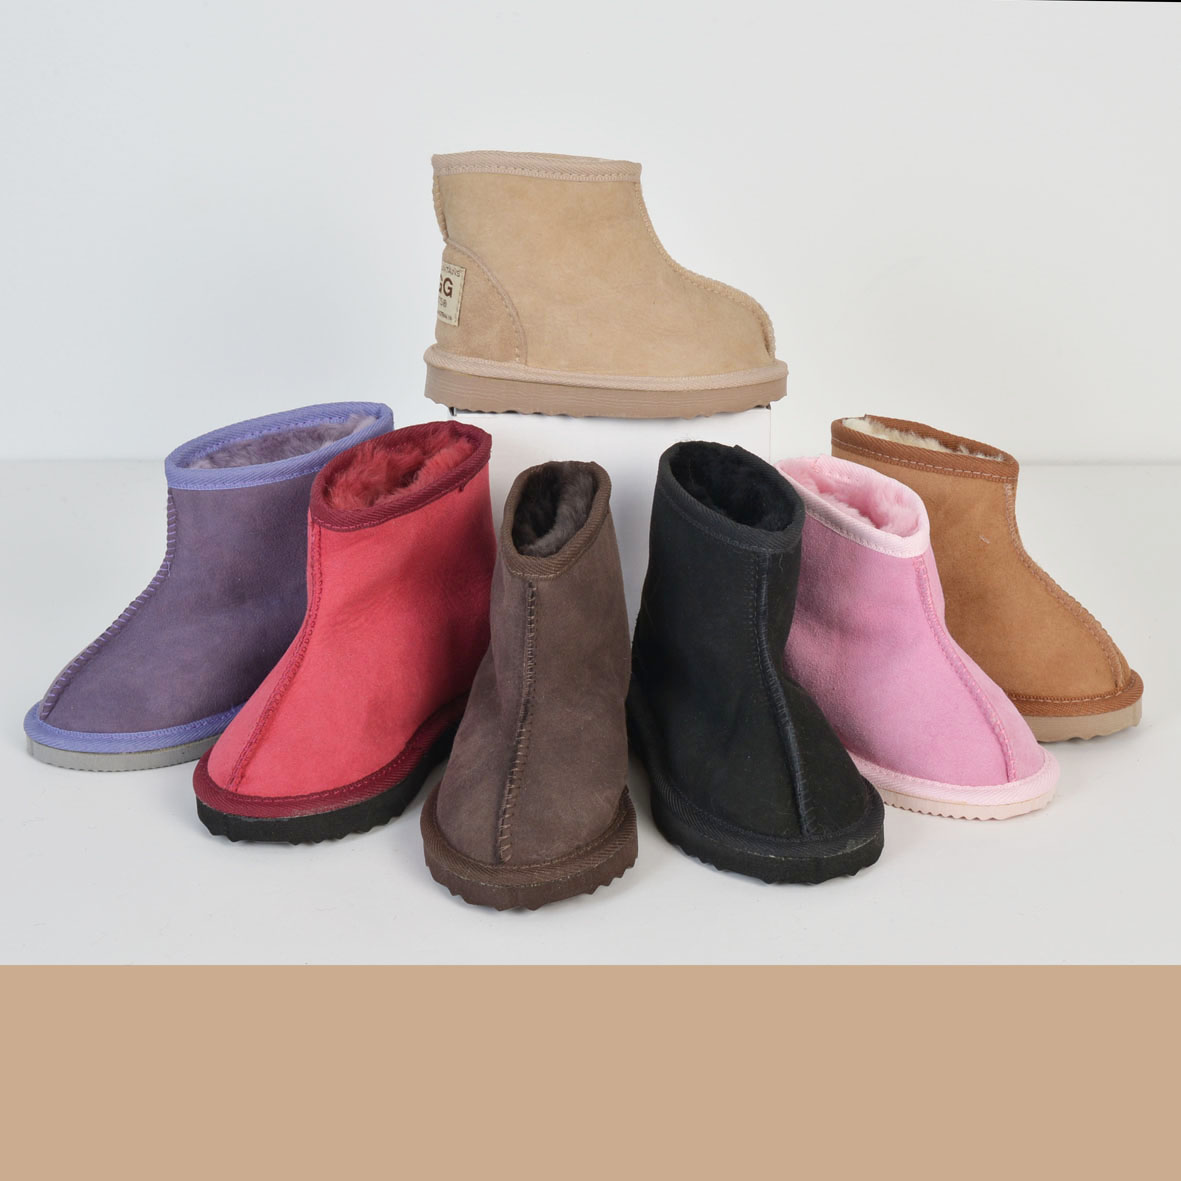 ugg boots fountain gate